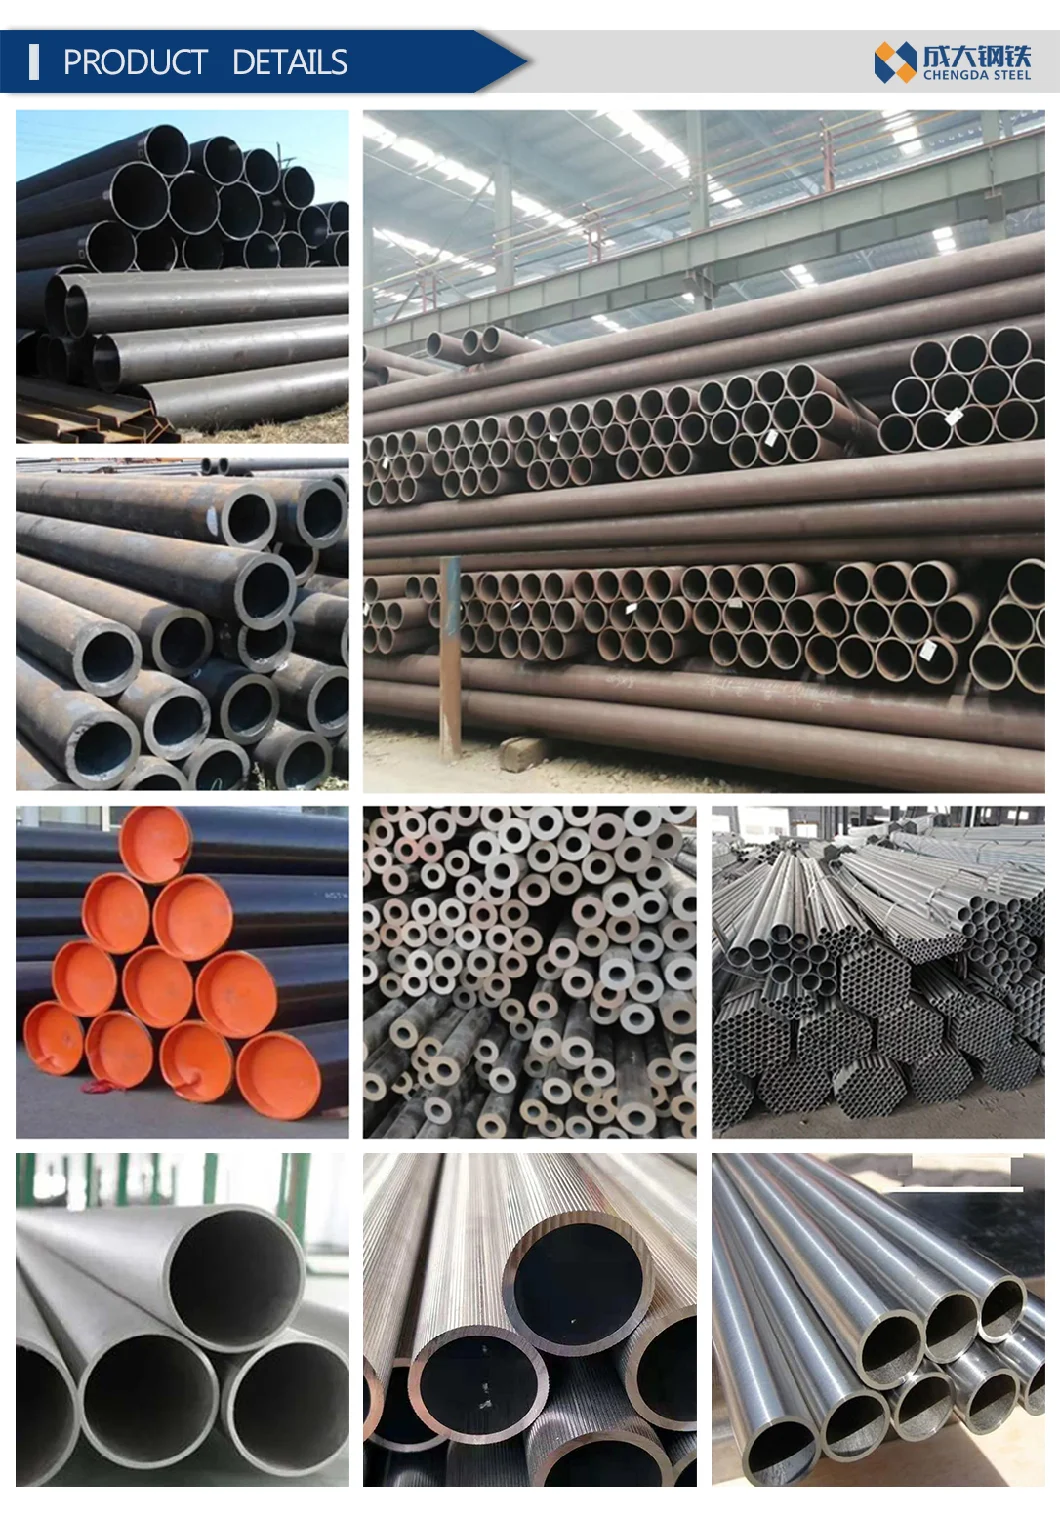 Factory Supply ASTM A335 Grade P5, P9, P11, P22, P91 Alloy Seamless Steel Pipe for Nuclear Power Plant